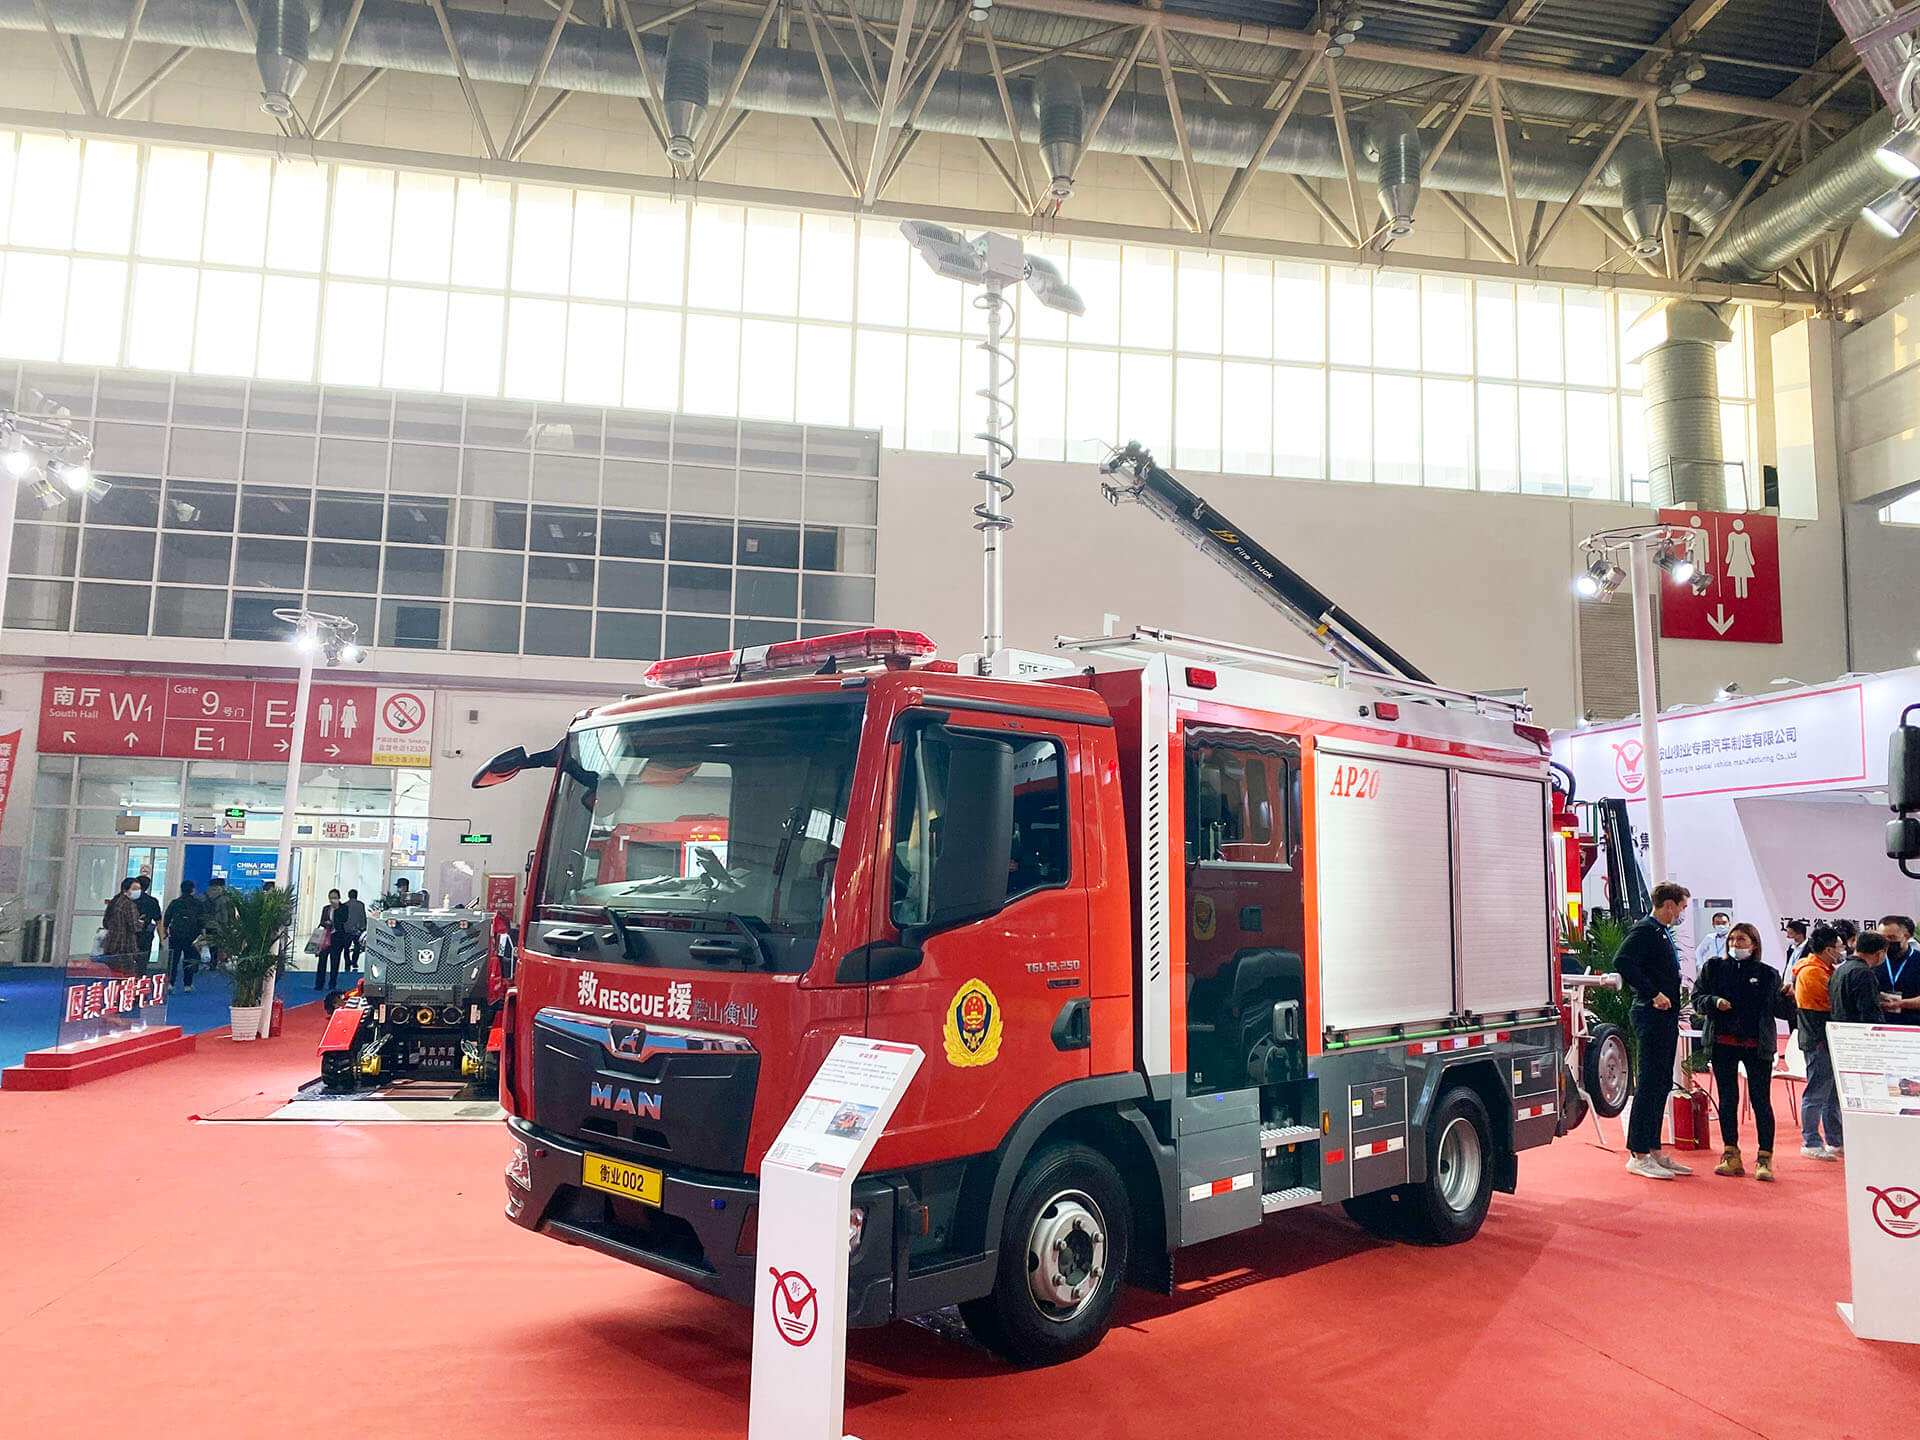 INTERNATIONAL FIRE TECHNOLOGY AND EQUIPMENT EXHIBITION-2